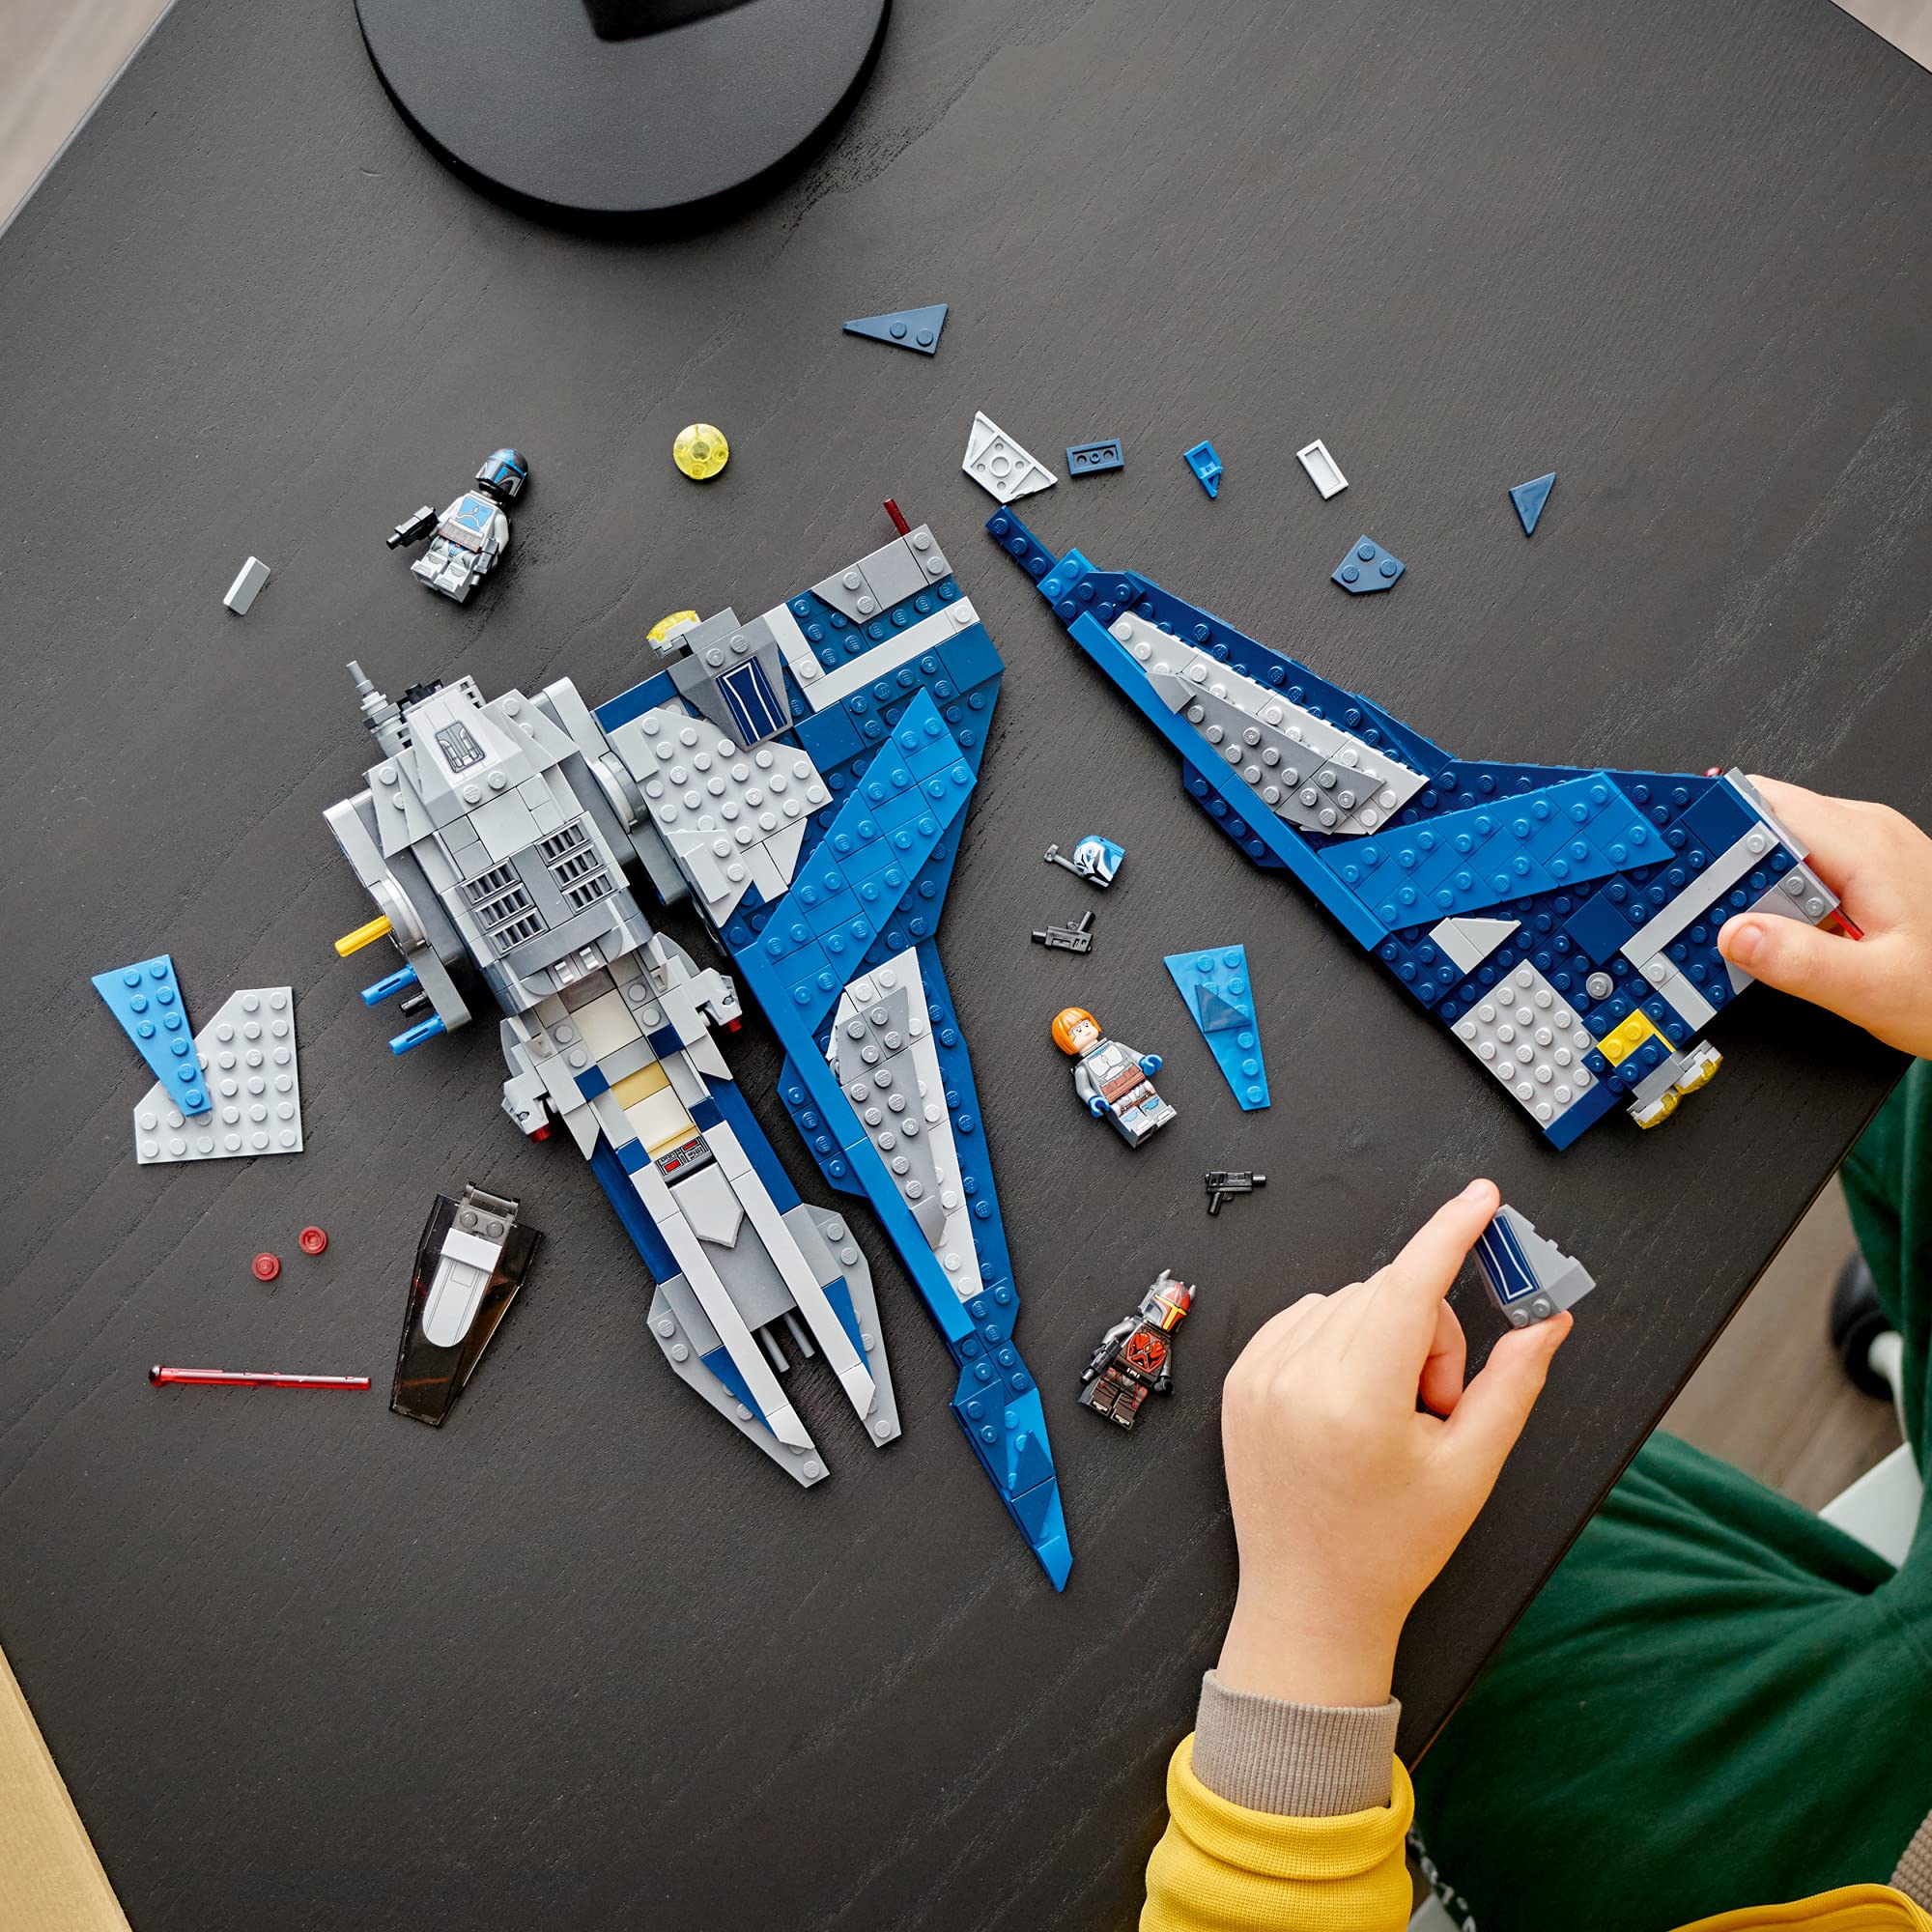 LEGO Star Wars Mandalorian Starfighter 75316 Awesome Toy Building Kit for Kids Featuring 3 Minifigures; New 2021 (544 Pieces)